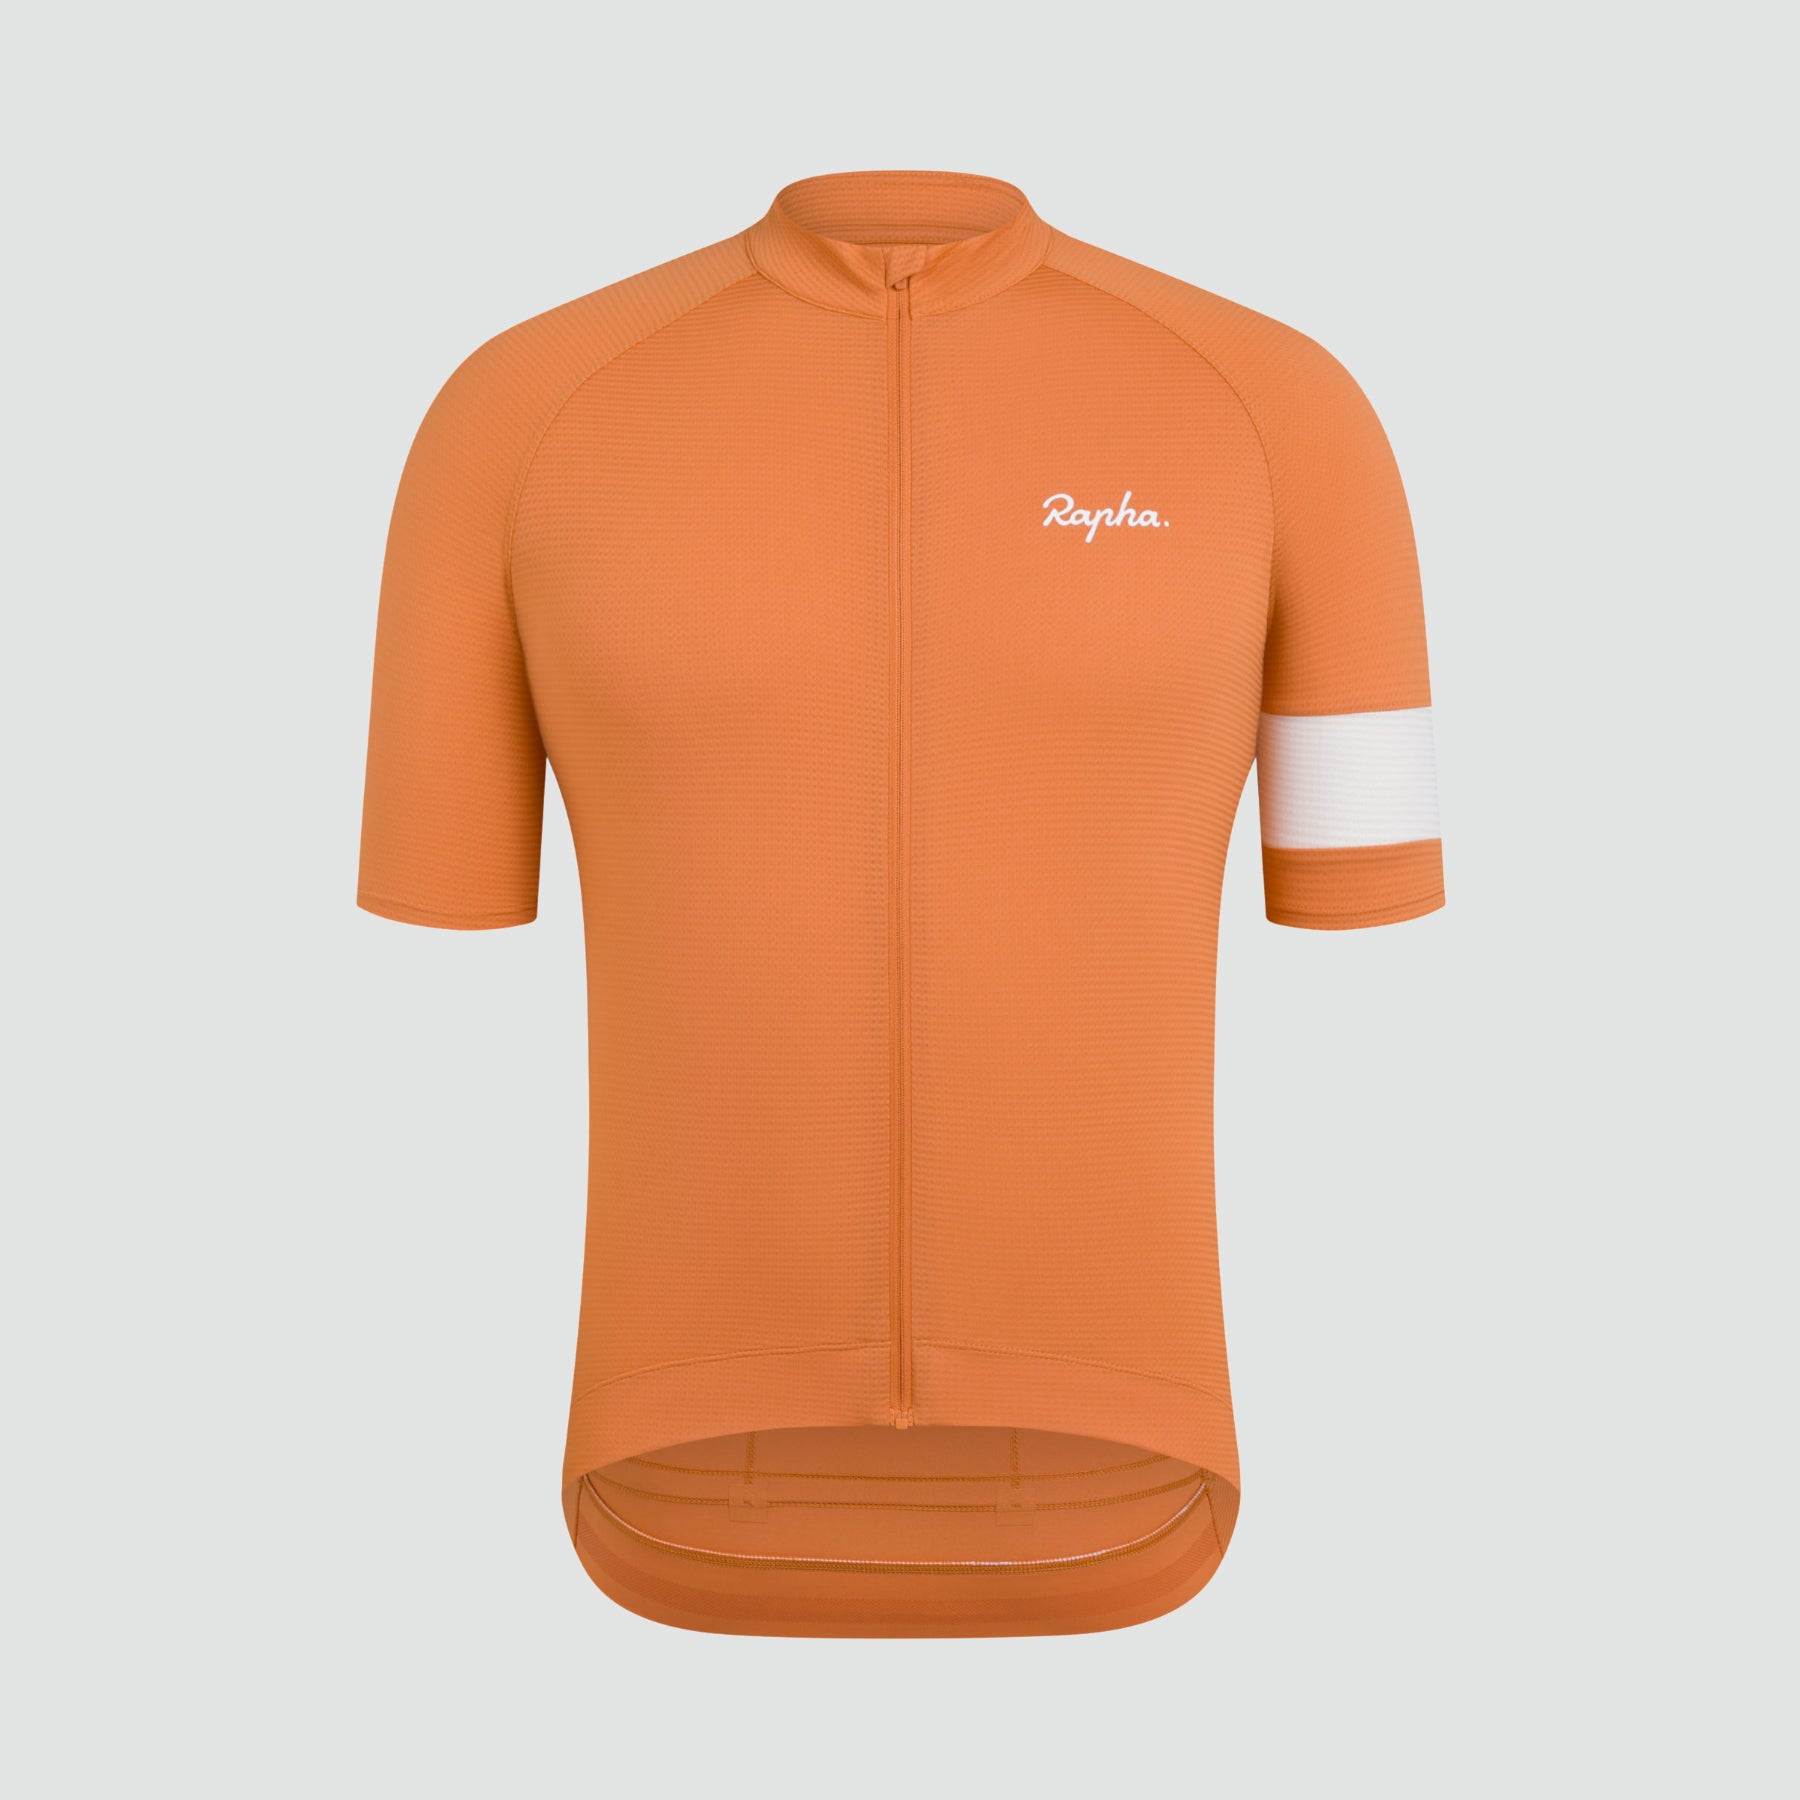 Rapha | on the Le Club Store